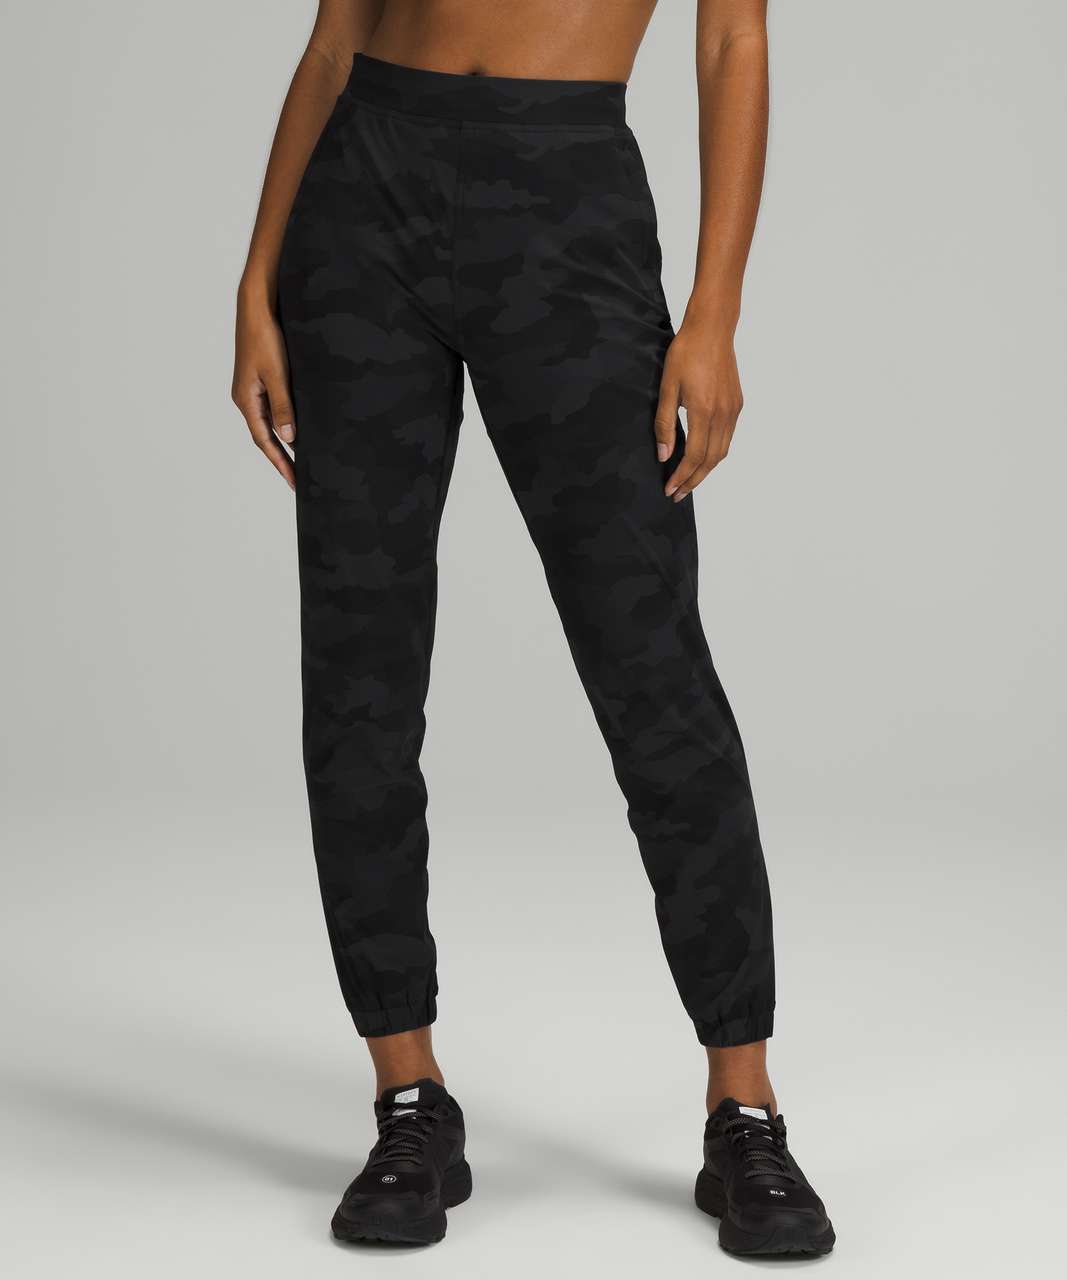 Joggers: a review. Featuring RTR, align joggers, adapted state jogger, and  scuba joggers! : r/lululemon